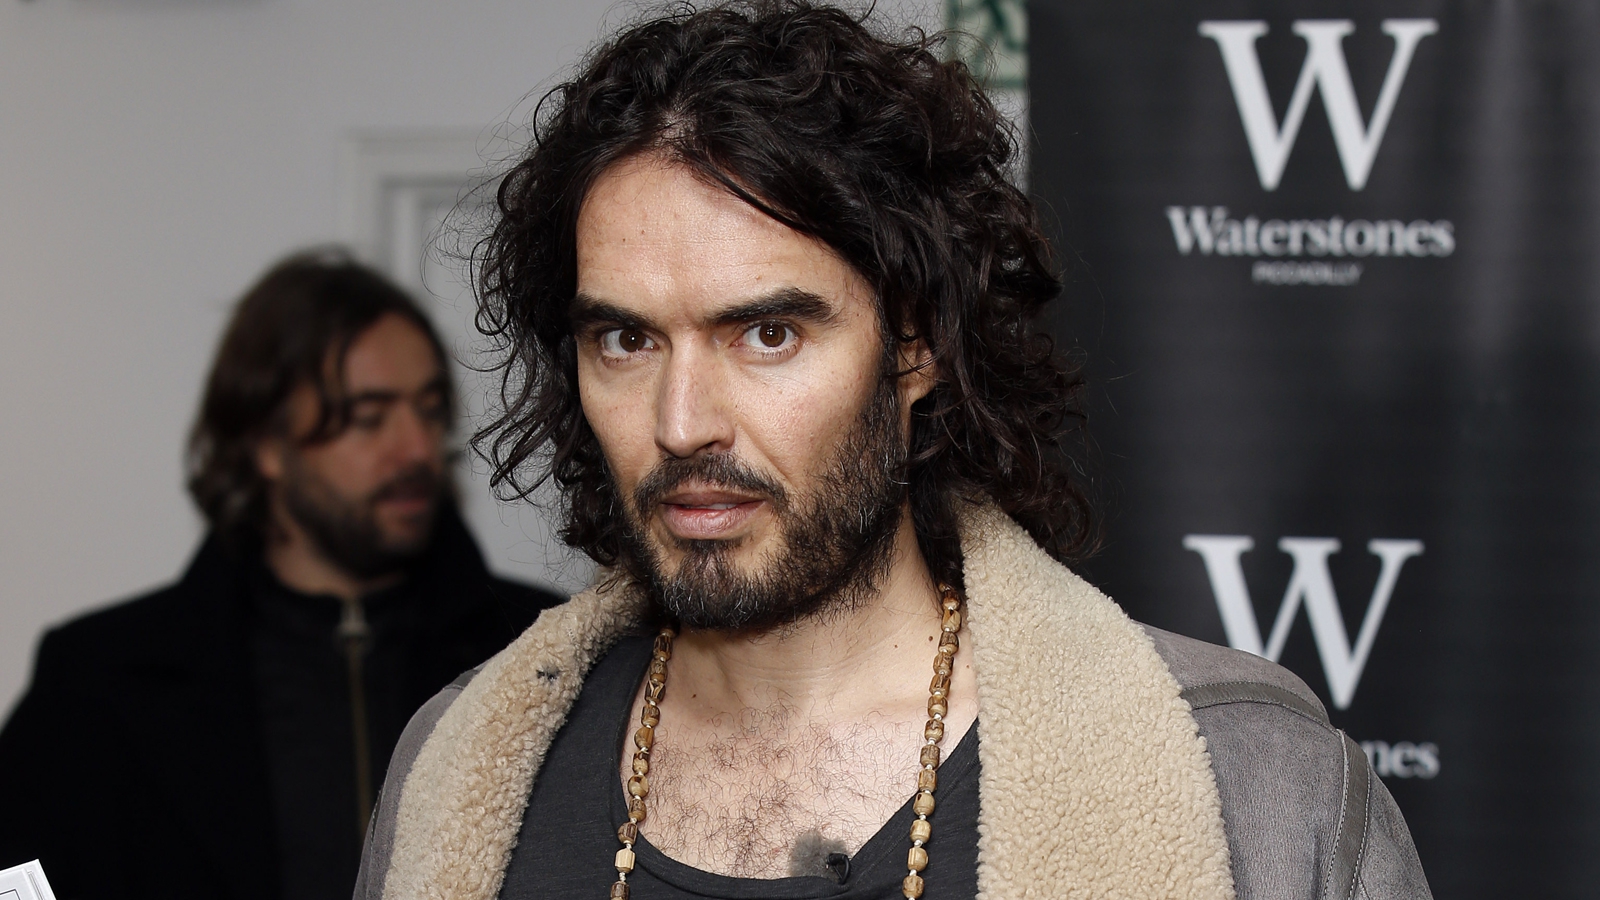 Watch! Trailer for Russell Brand's new documentary